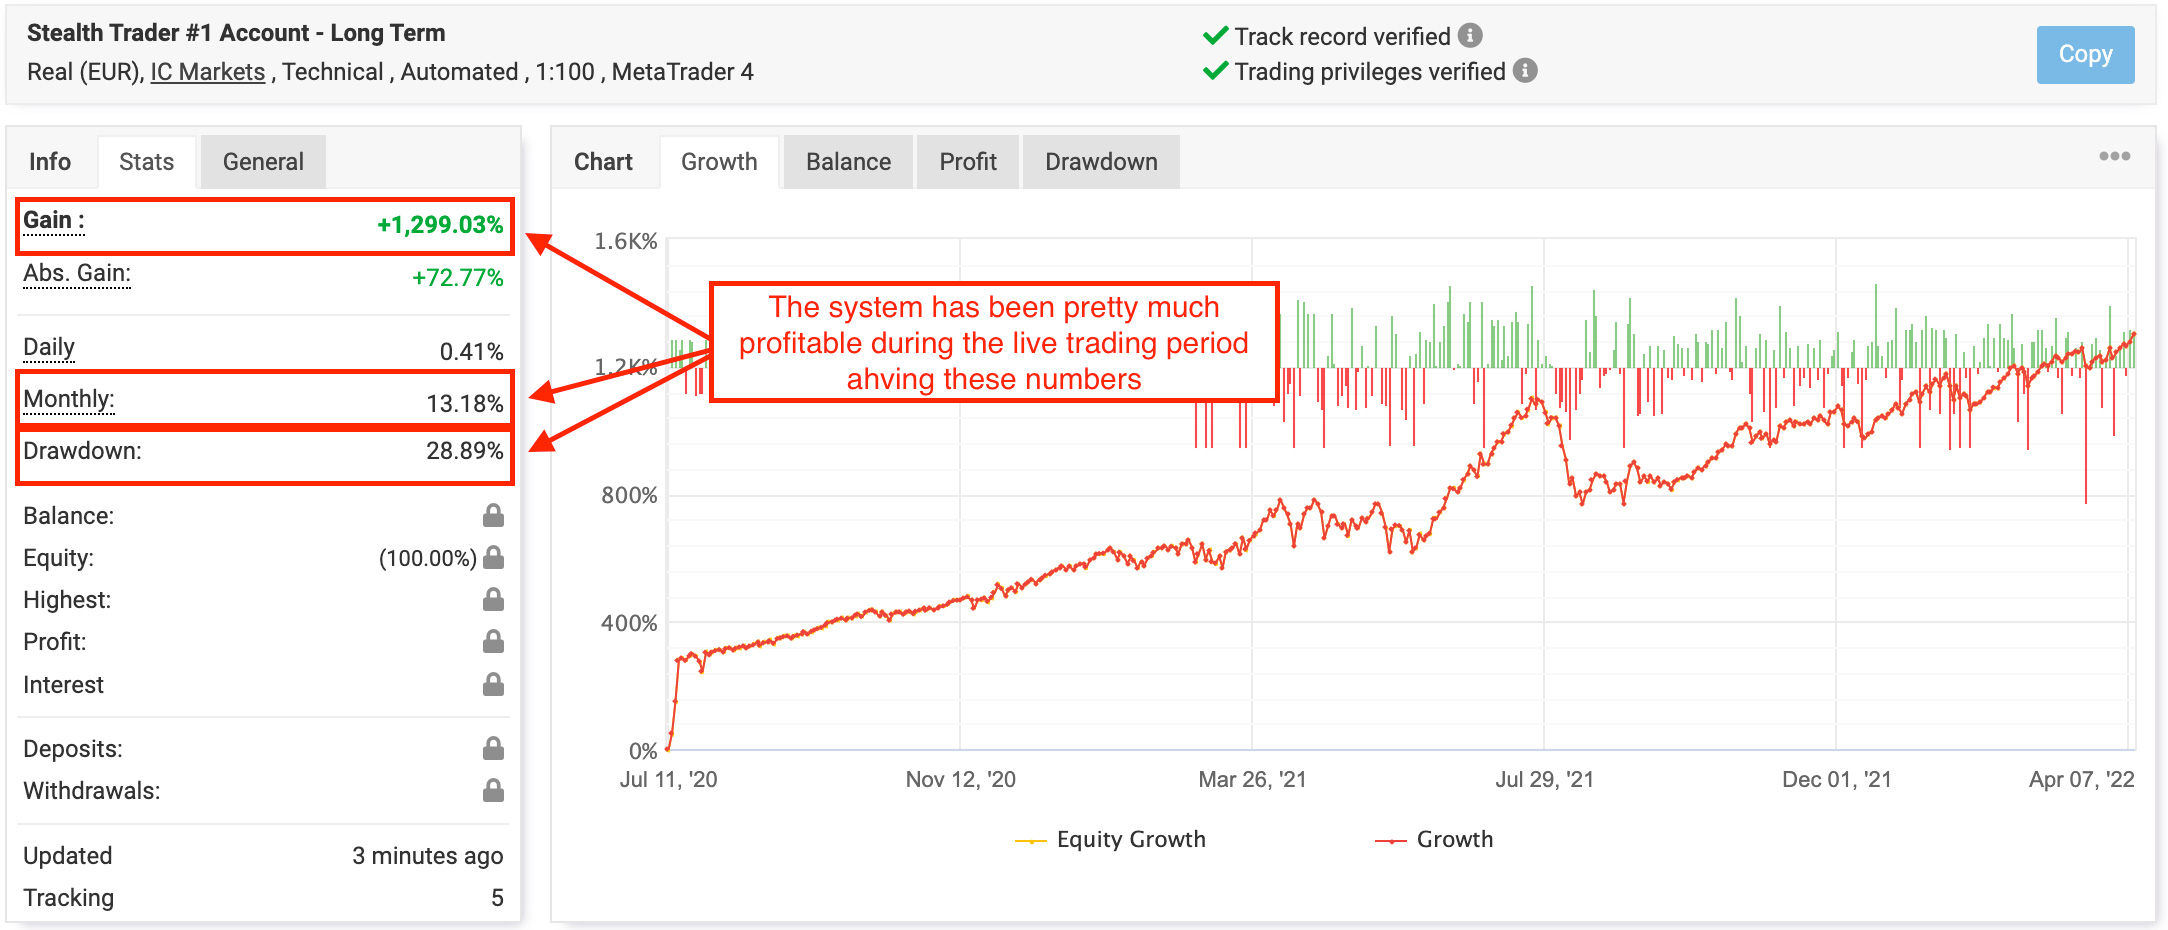 Stealth Trader EA live trading statistics from Myfxbook